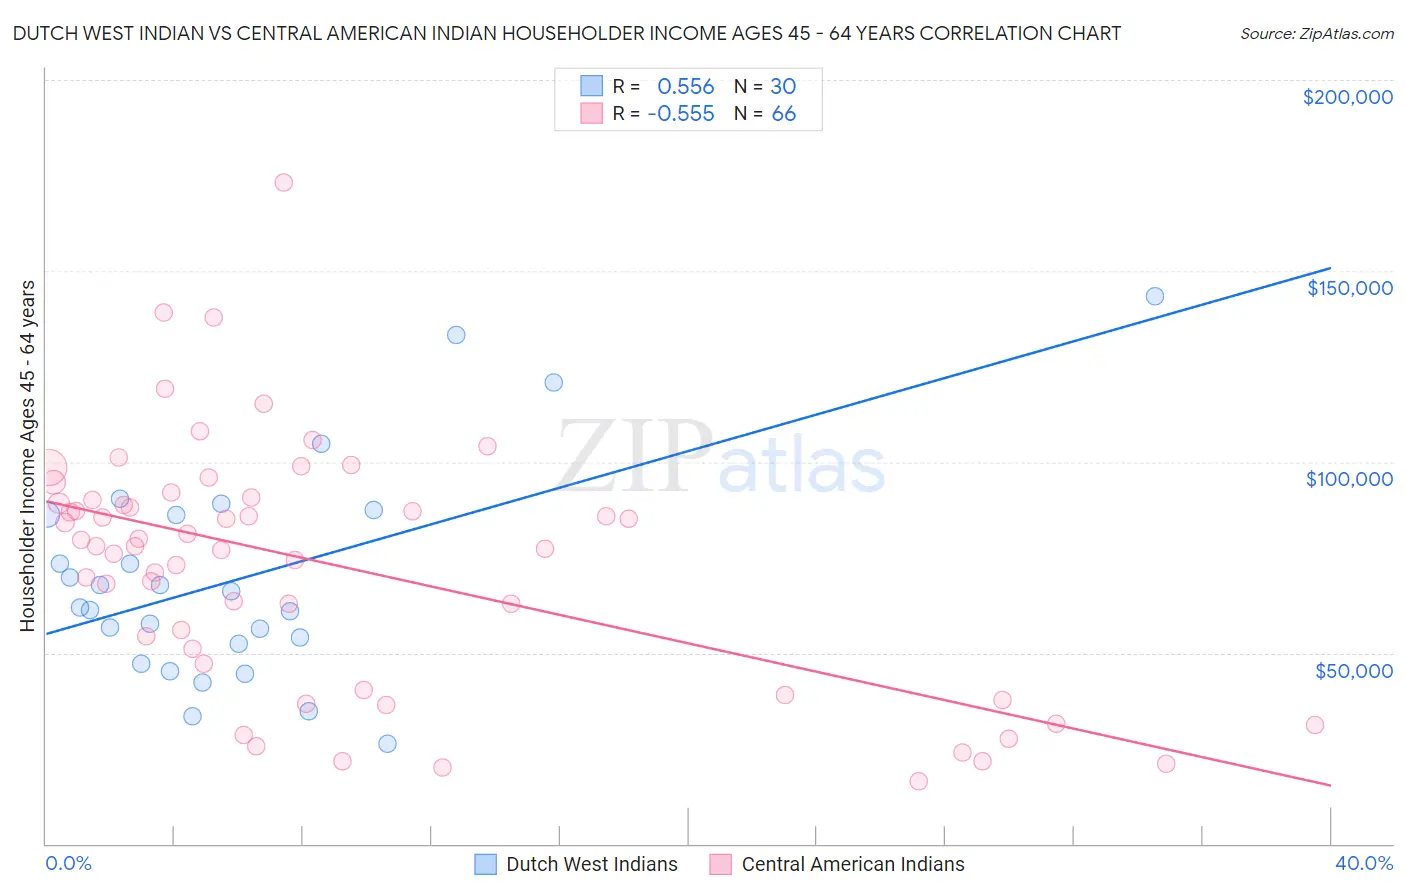 Dutch West Indian vs Central American Indian Householder Income Ages 45 - 64 years